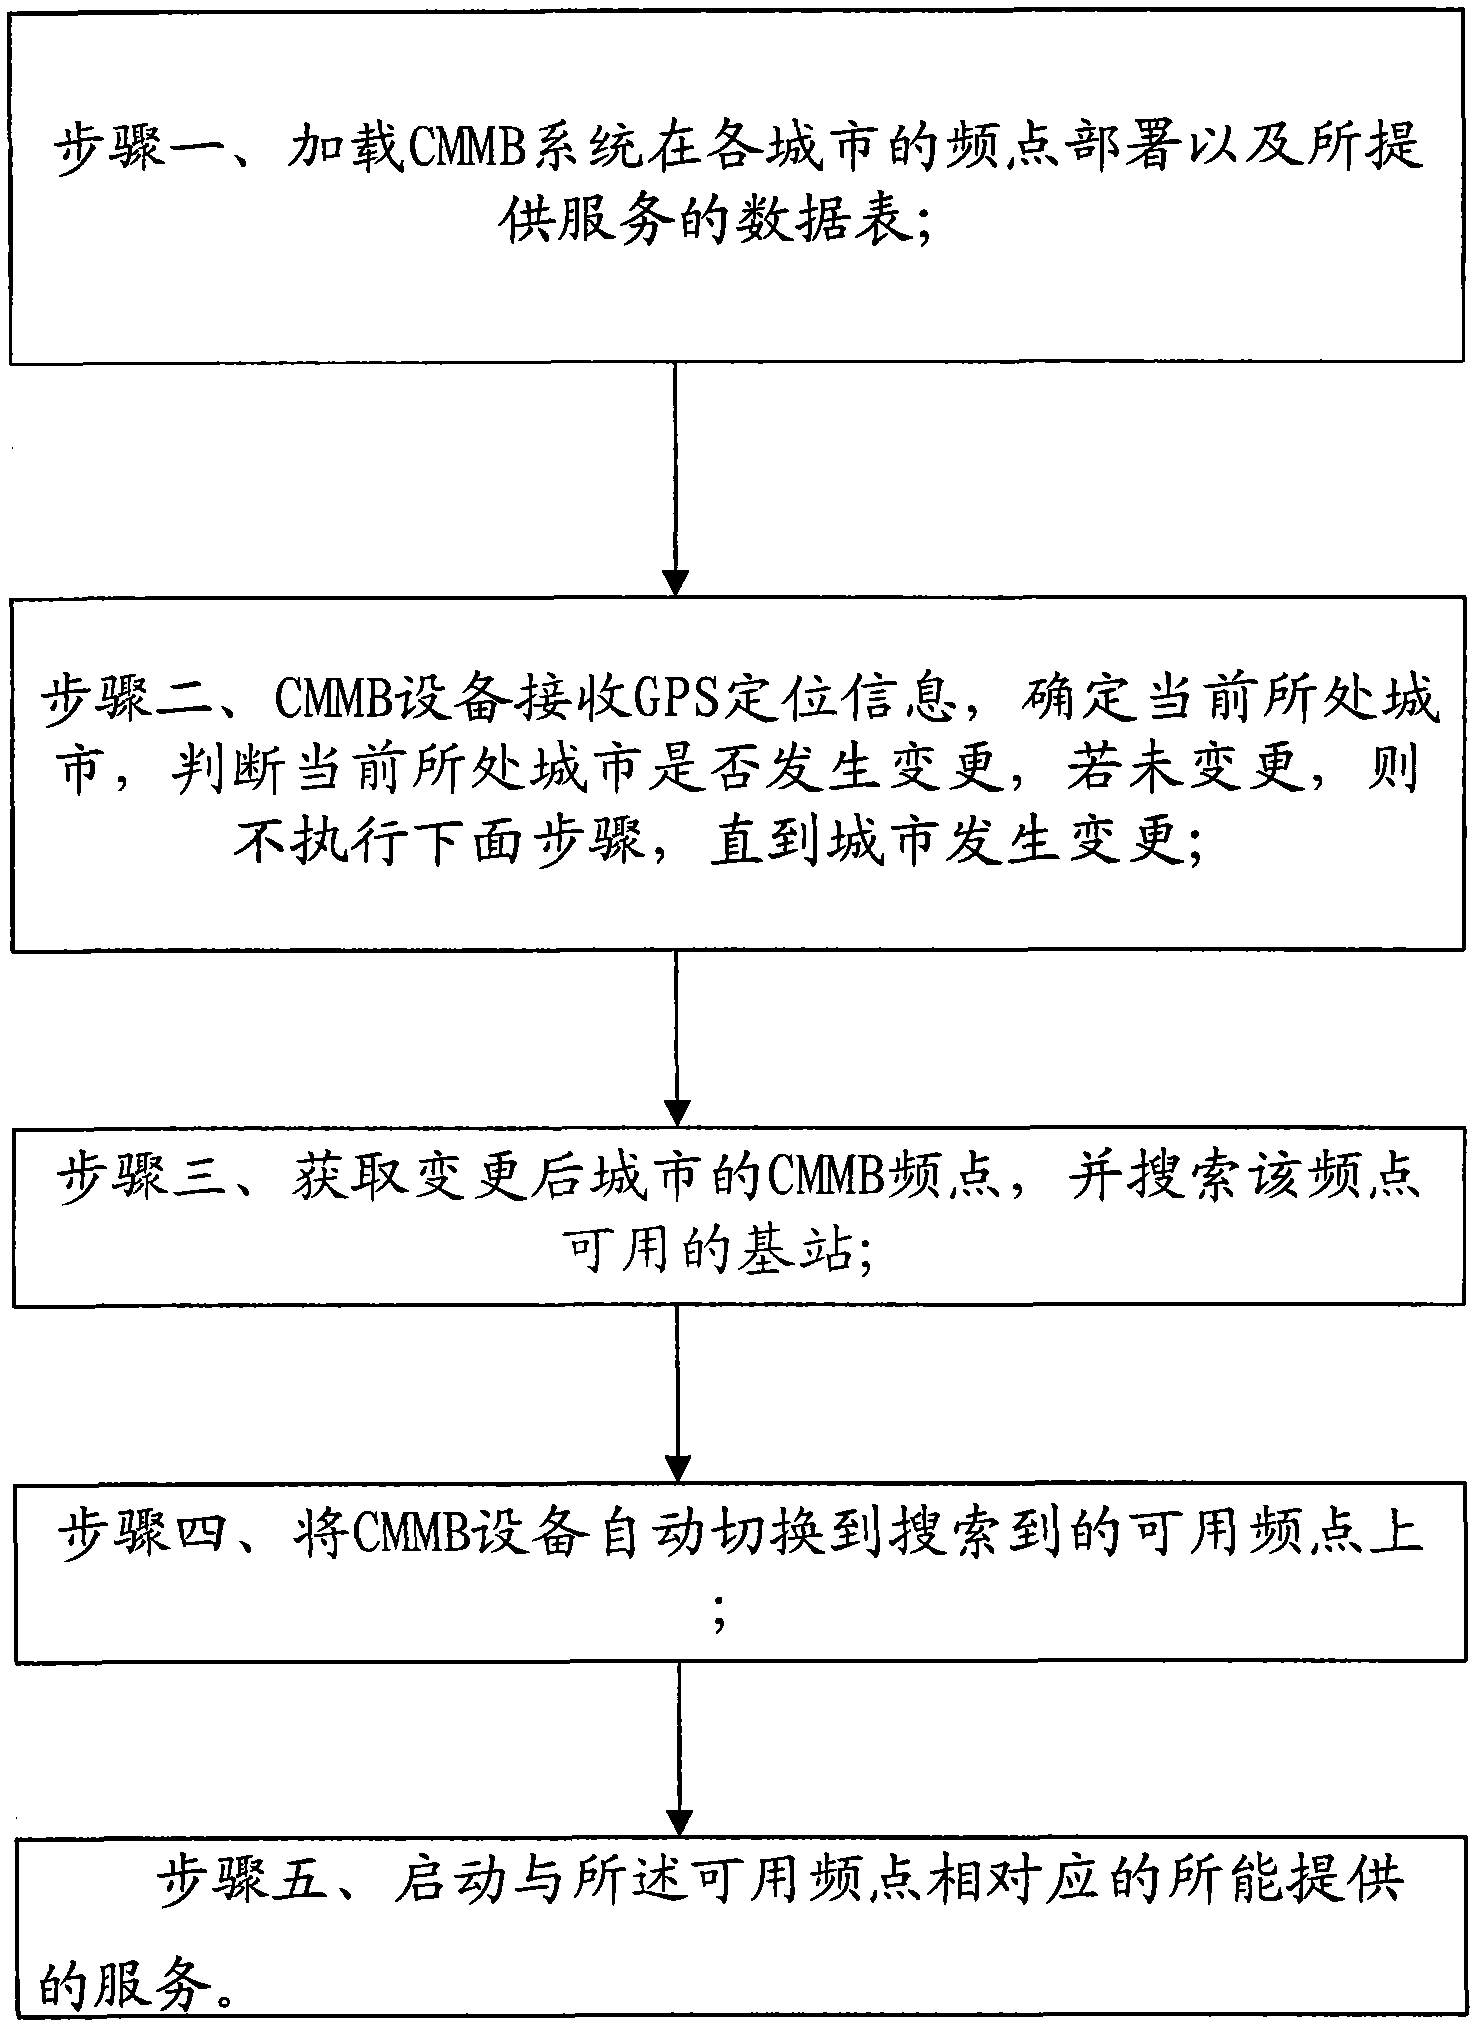 Method and device for automatically switching China mobile multimedia broadcasting (CMMB) equipment cities